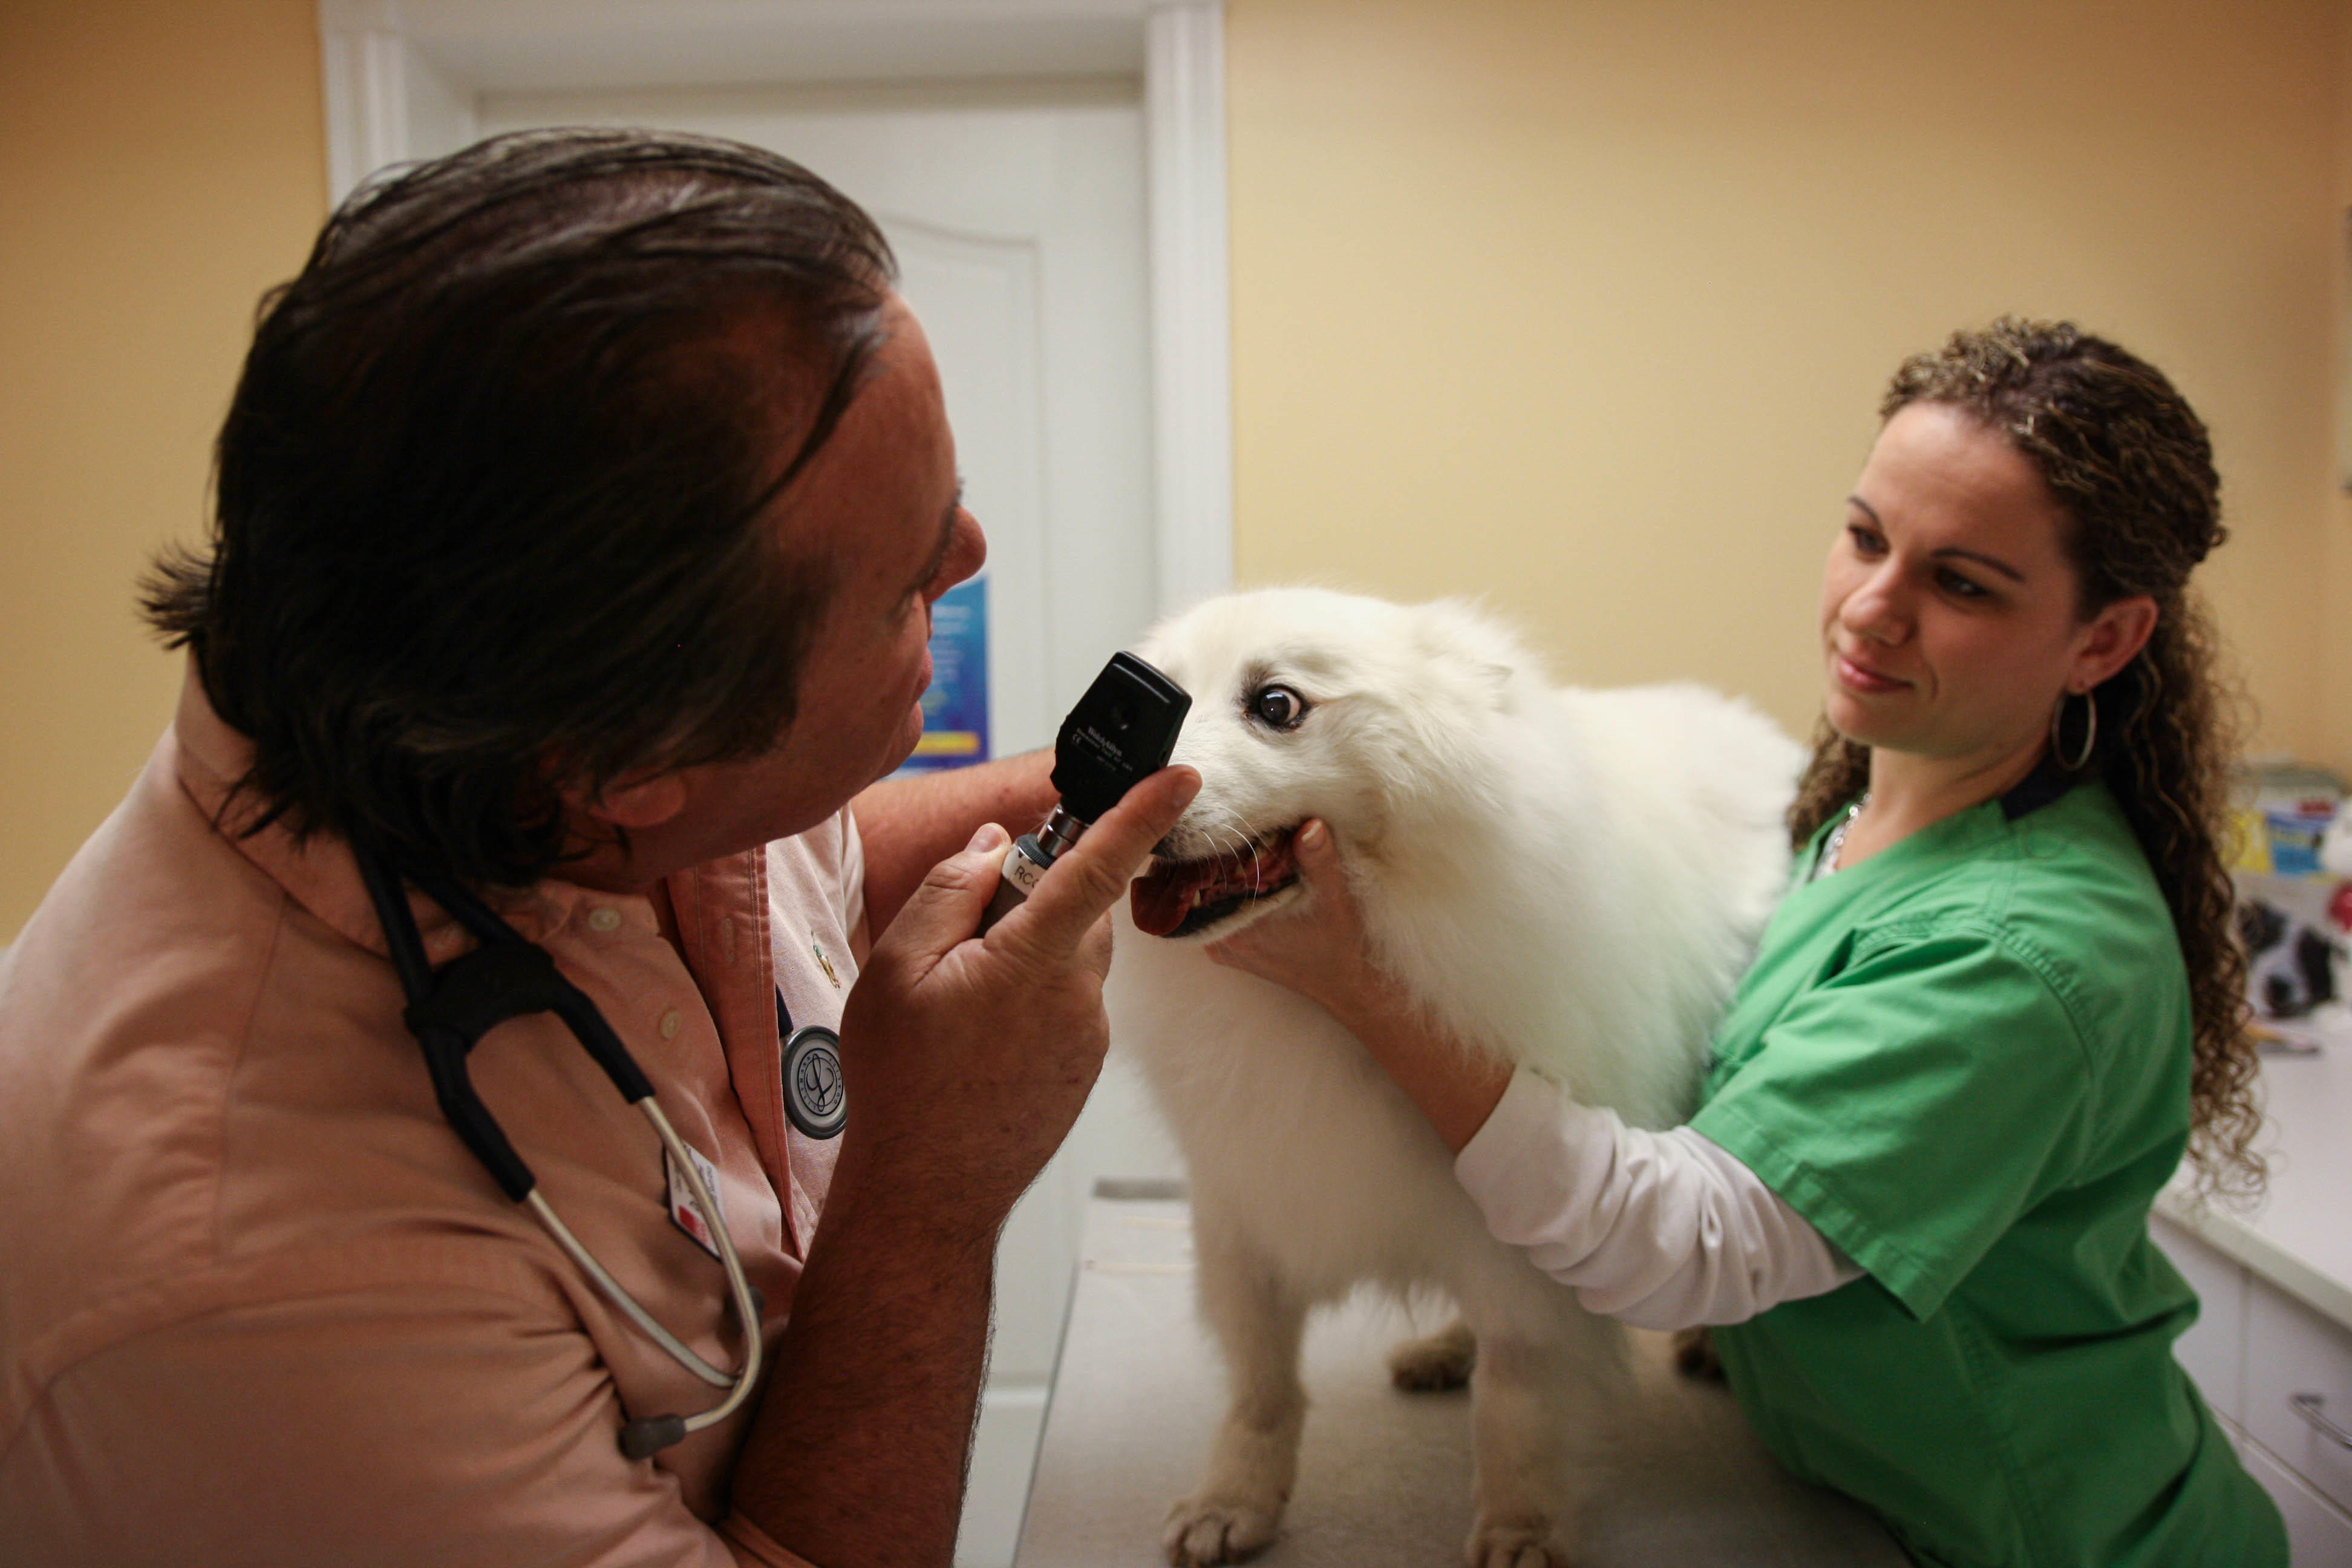 Healthy eyes are clear, white, and bright! Here, Dr. Krawitz uses an otoscope to ensure exceptional eye health.